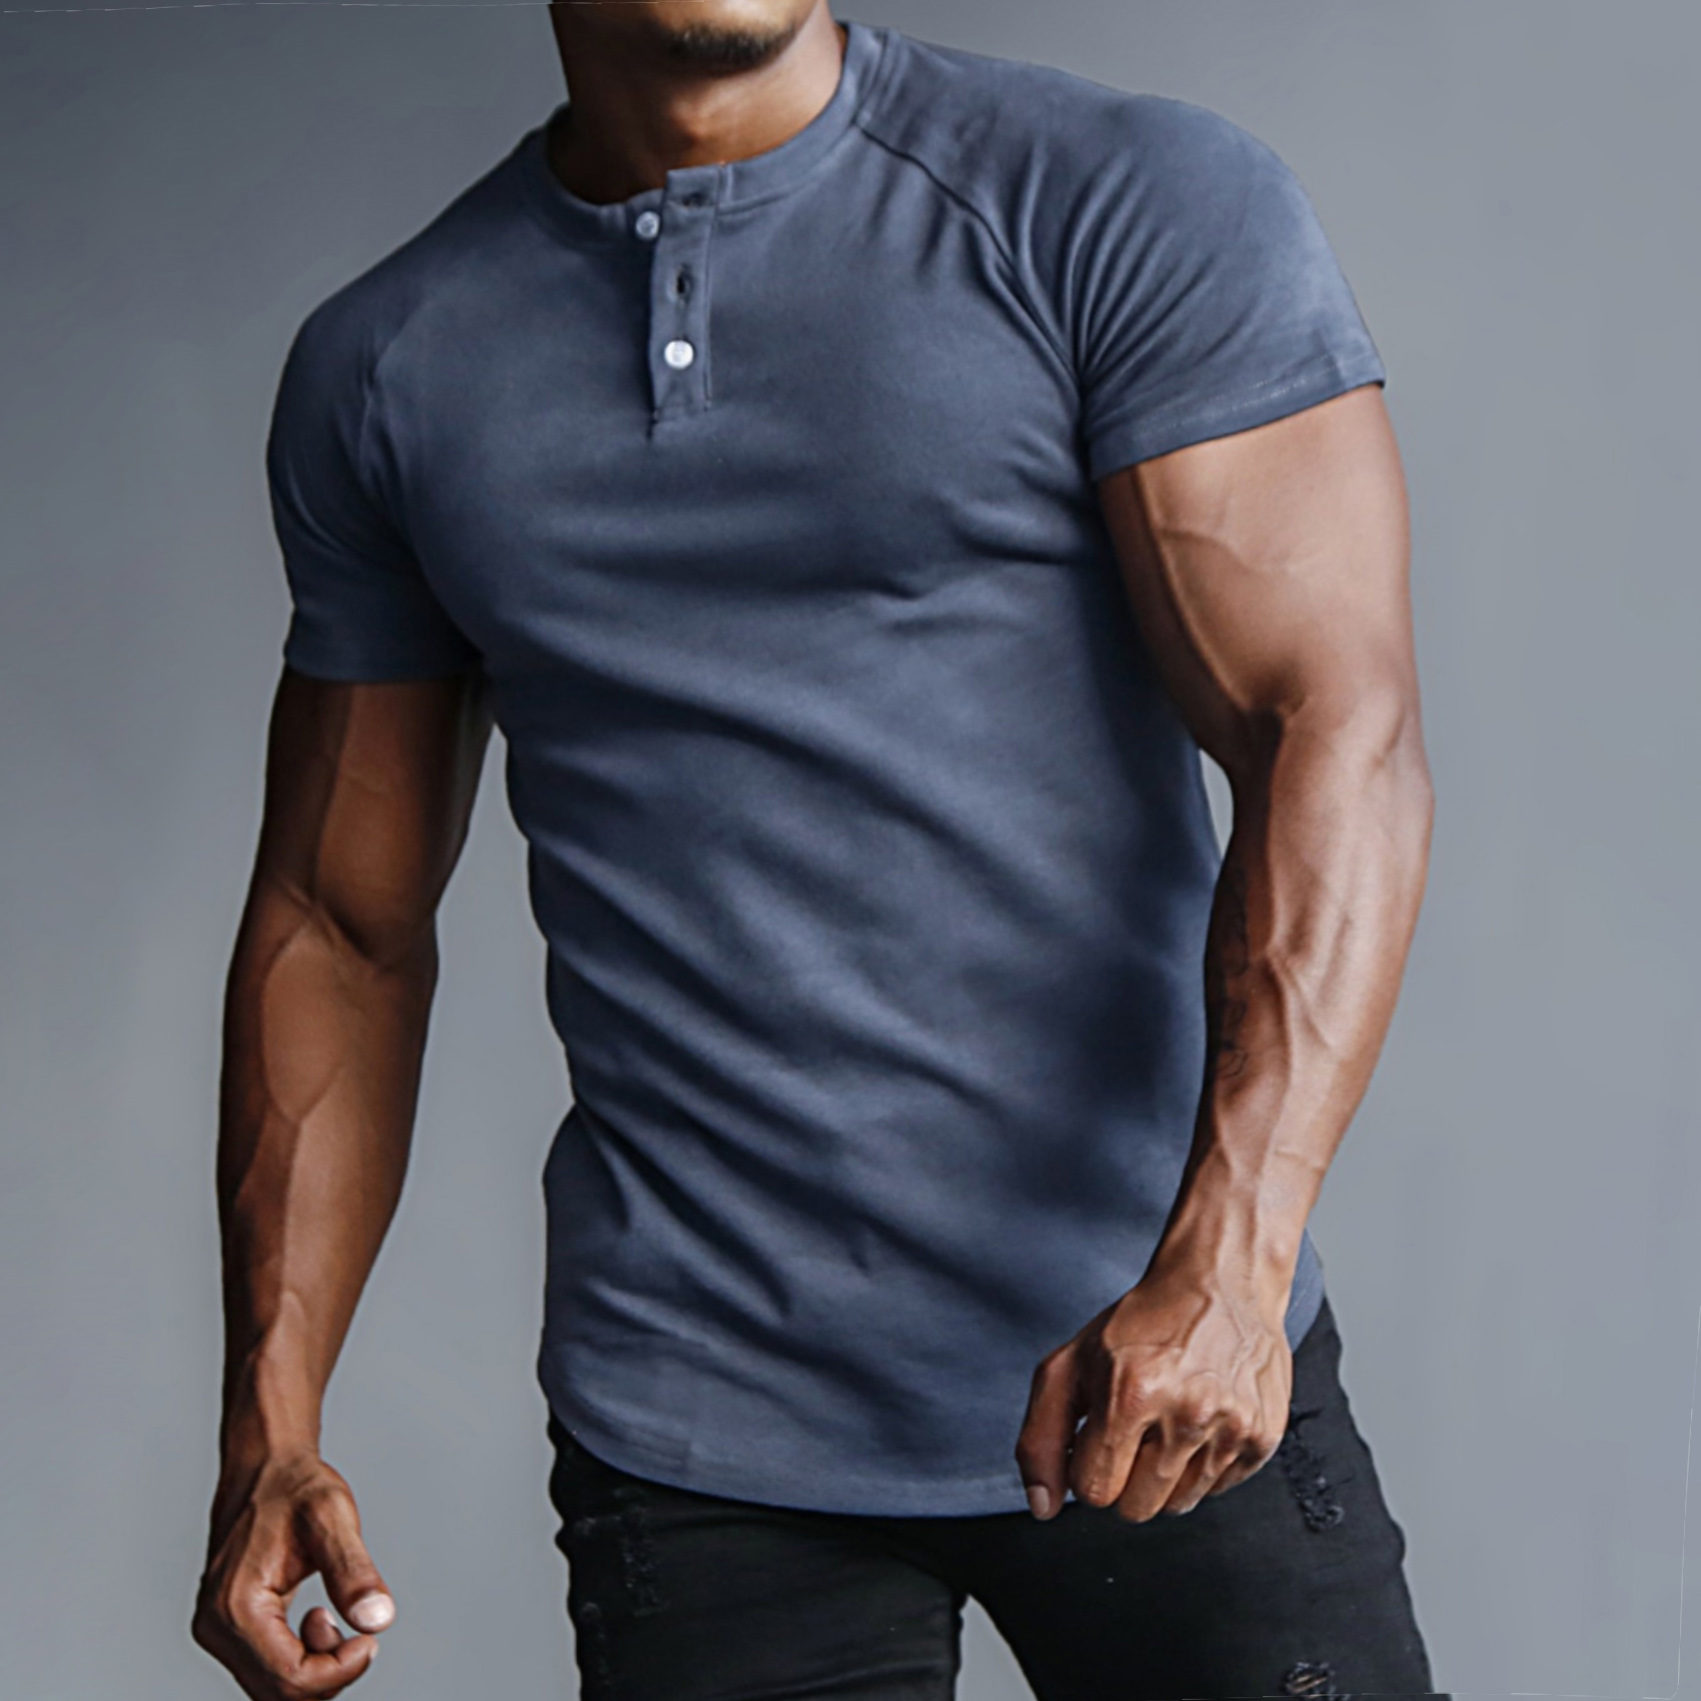 Men's Outdoor Casual Solid Chic Color Henry Collar Bottoming Shirt Sports Fitness Running Slim Short-sleeved T-shirt